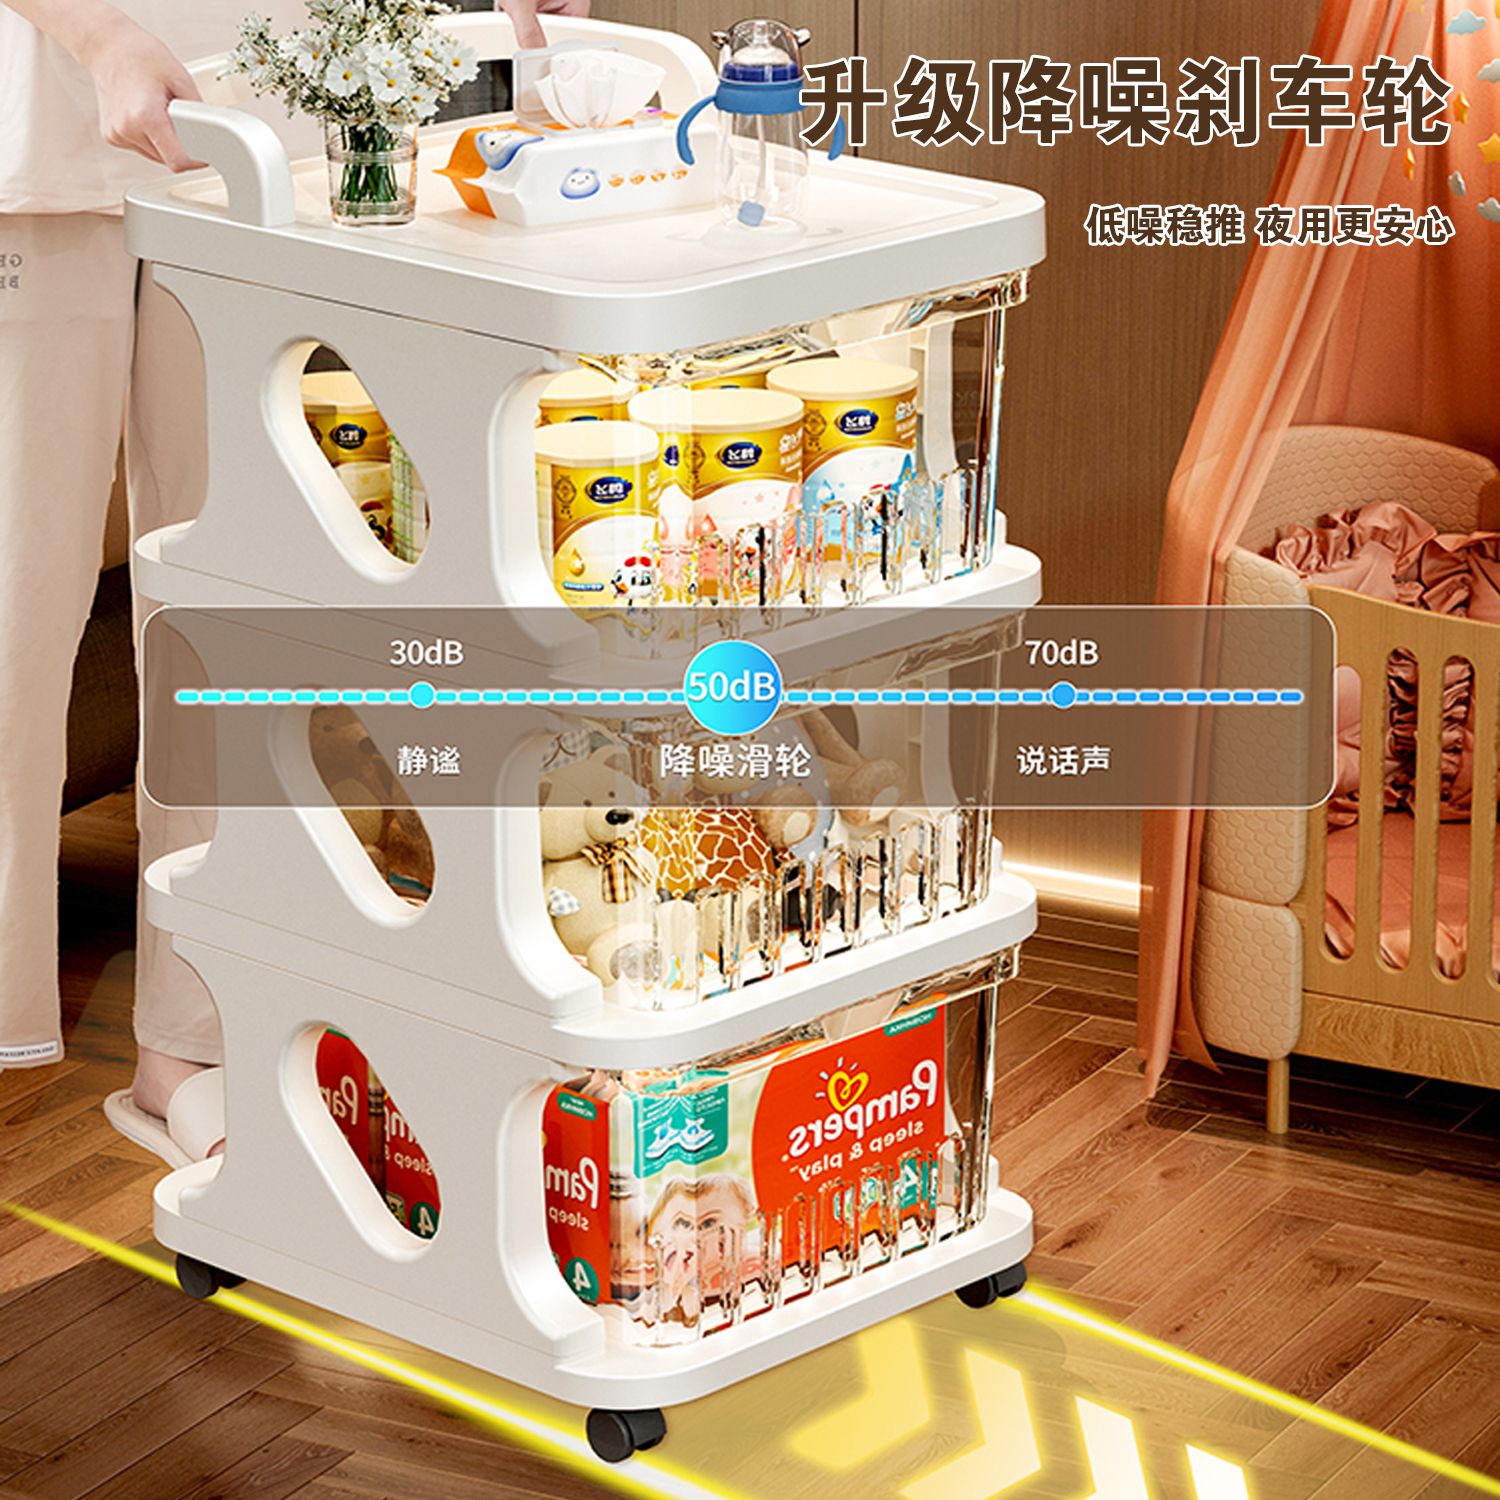 Anyabang stroller snack rack baby products storage cabinet multi-layer storage rack removable toy storage box